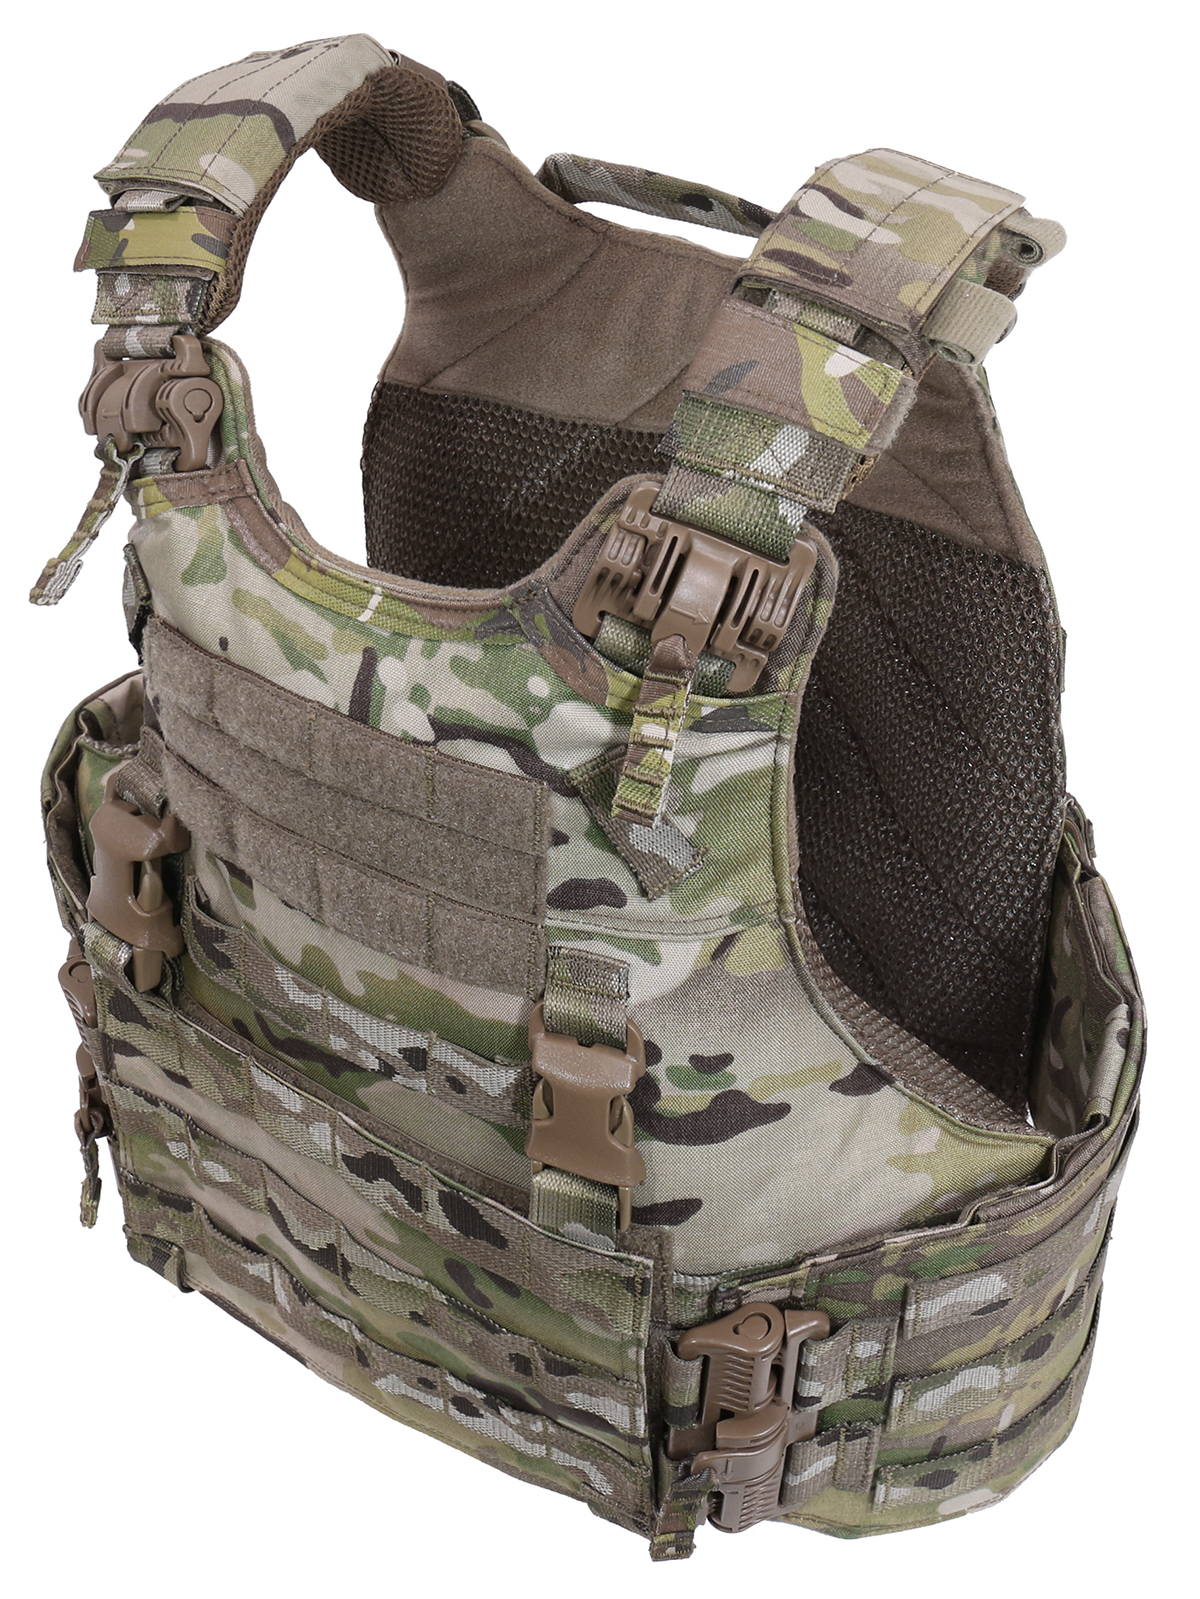 The Quad Release Carrier (QRC) from Warrior Assault Systems is a compact ca...